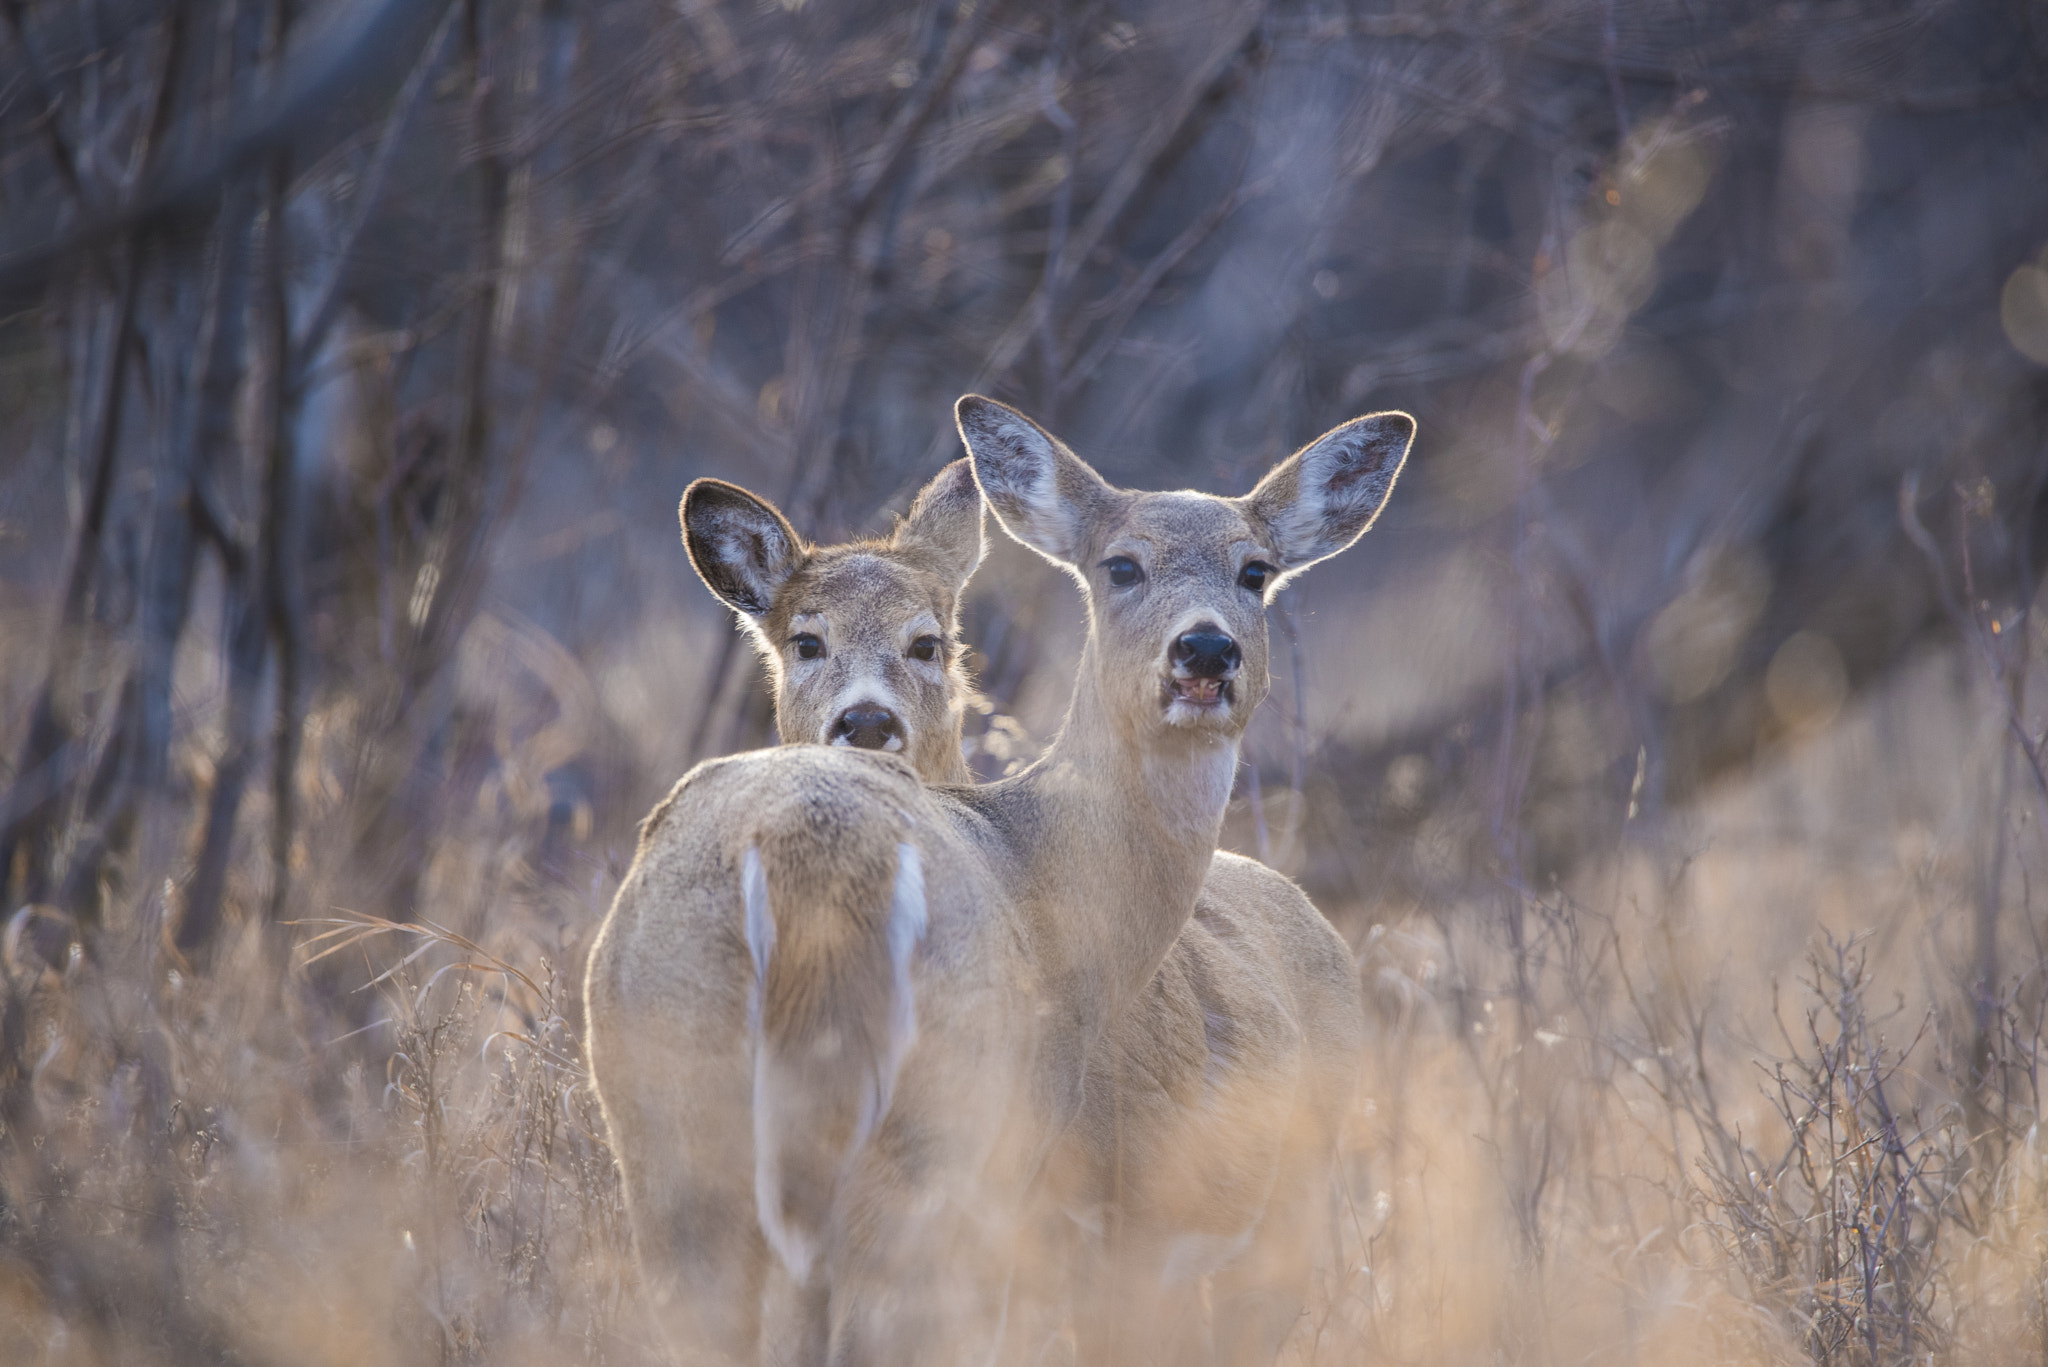 Nikon D750 + Sigma 150-600mm F5-6.3 DG OS HSM | C sample photo. Young deer in the woods photography